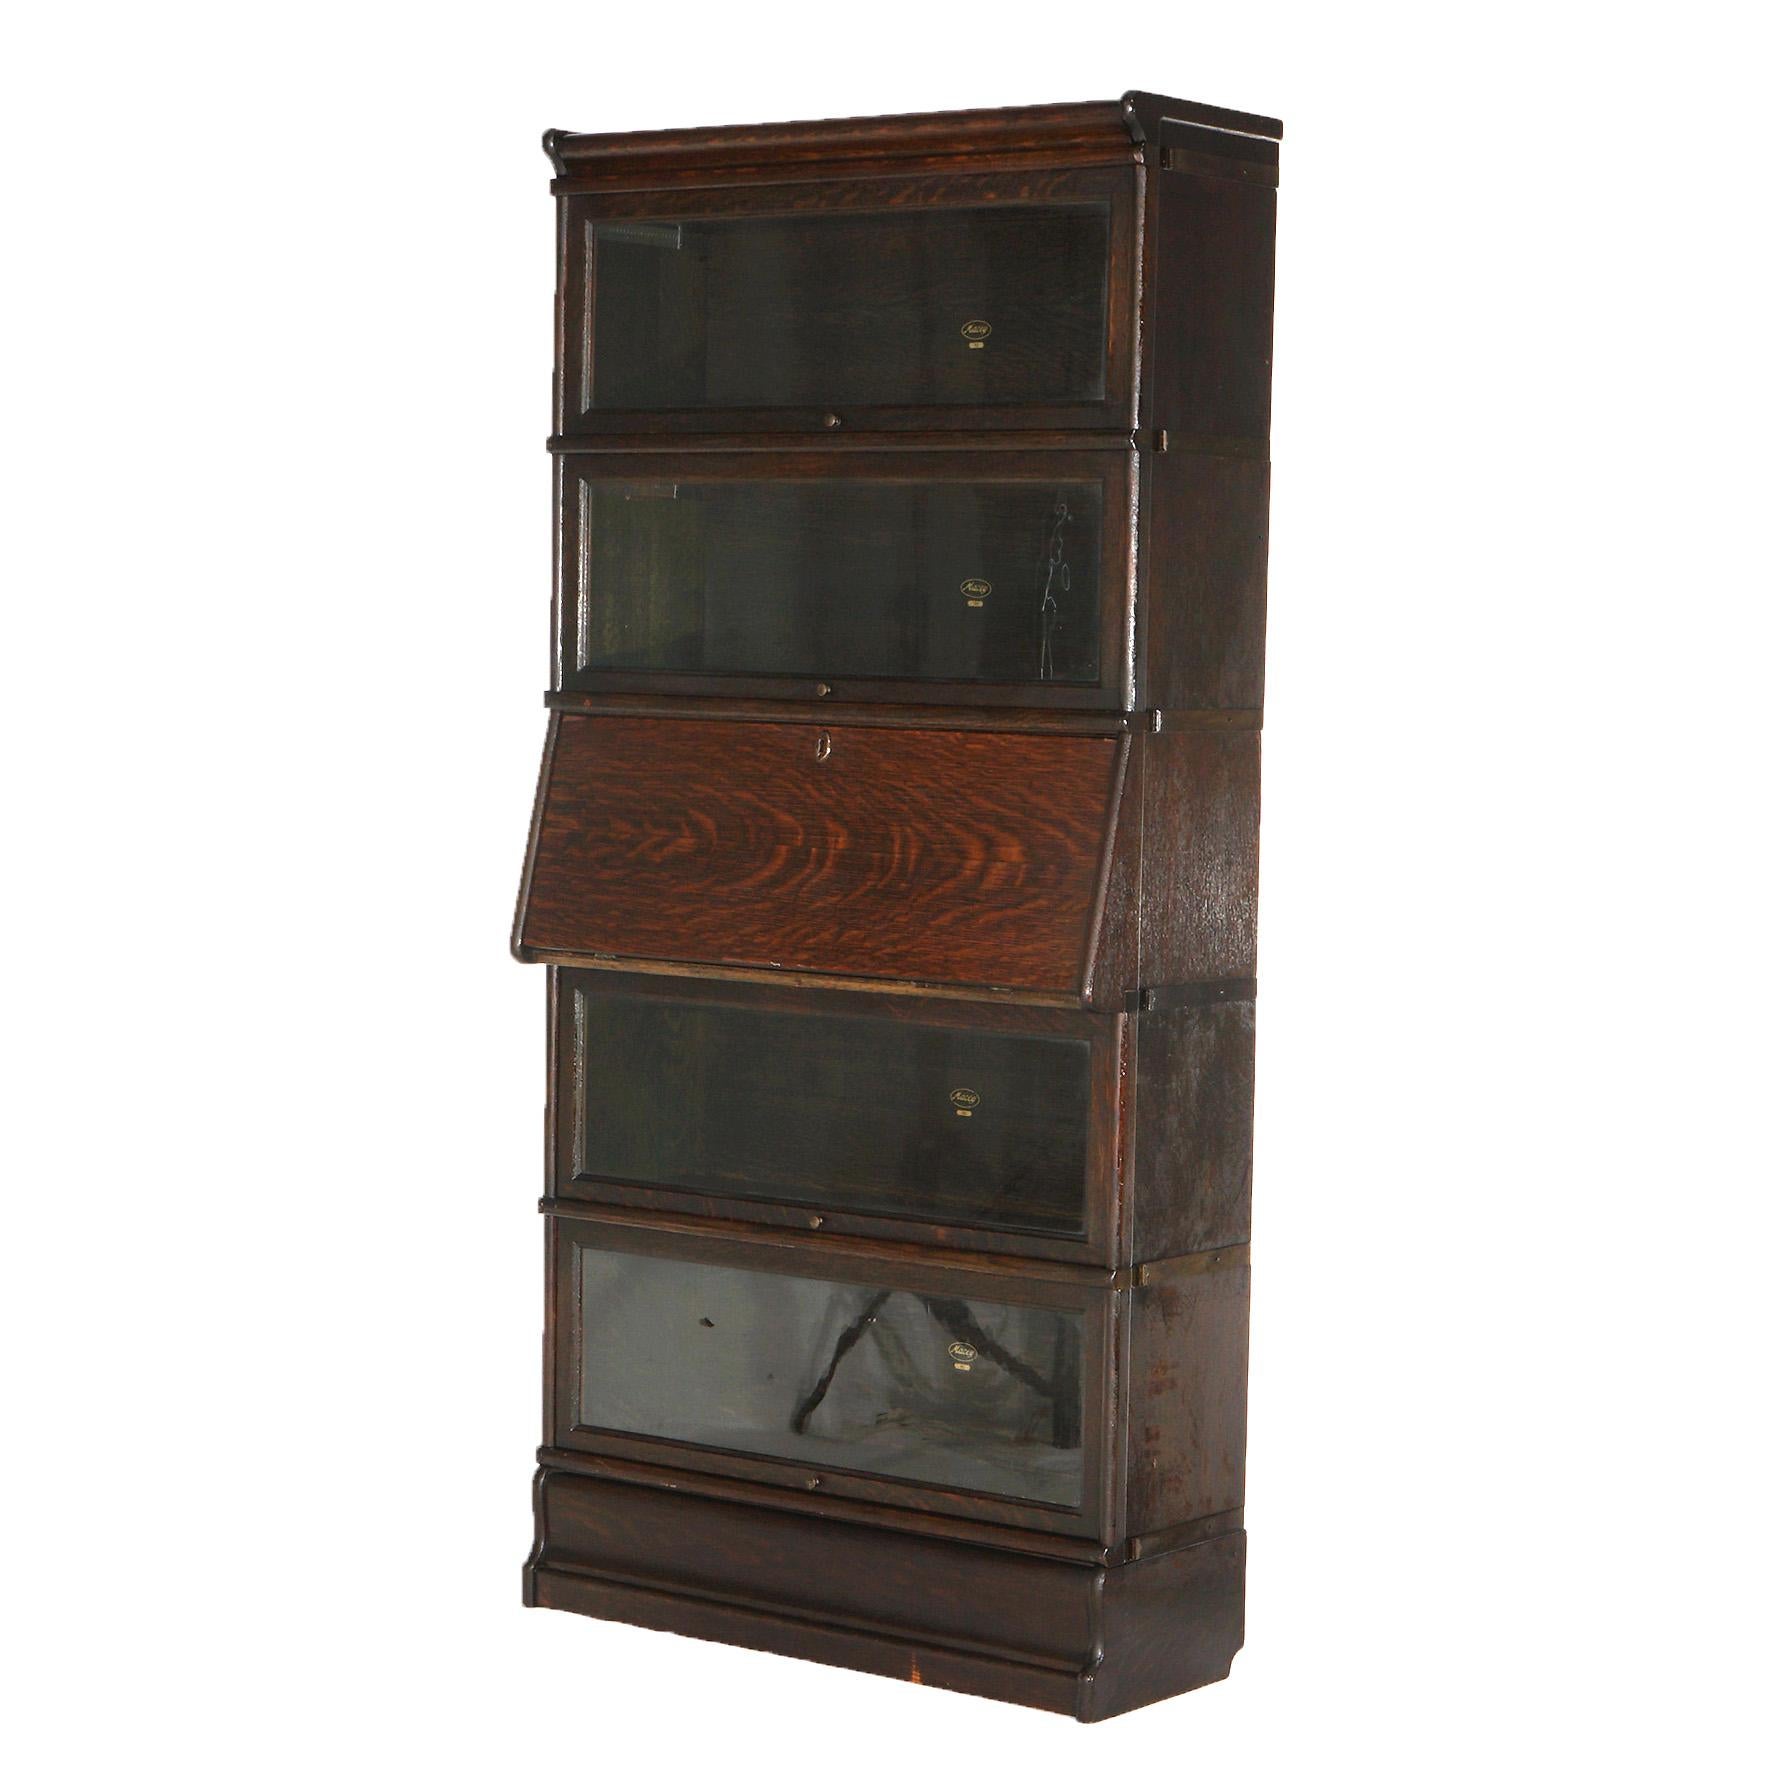 ***Ask About Reduced In-House Shipping Rates - Reliable Service & Fully Insured***
An antique Arts and Crafts barrister bookcase by Macey offers quarter sawn oak construction with fur stacks having pullout glass doors and one with drop-down desk,